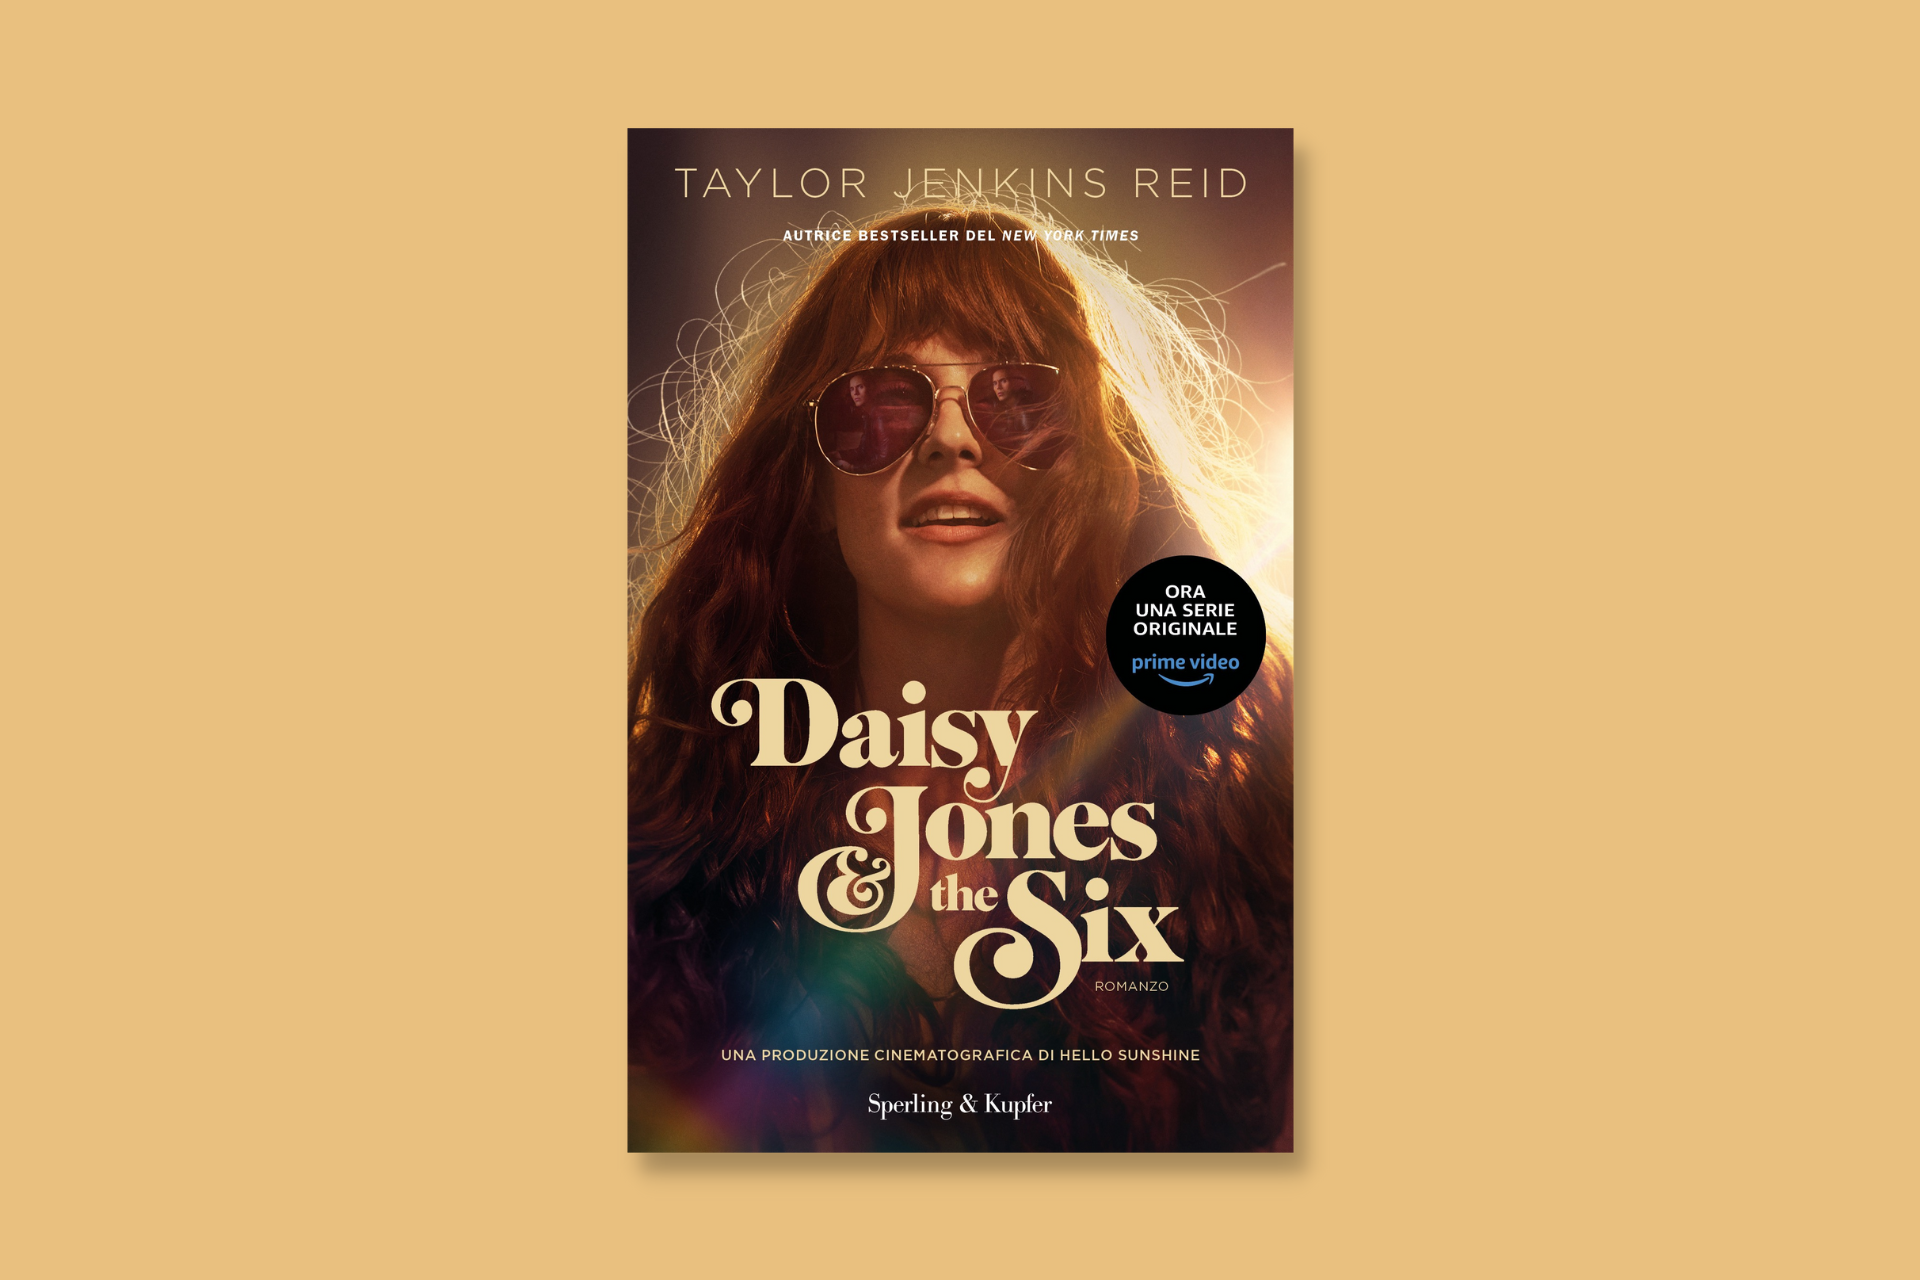 Daisy Jones & The Six is back in the bookstores